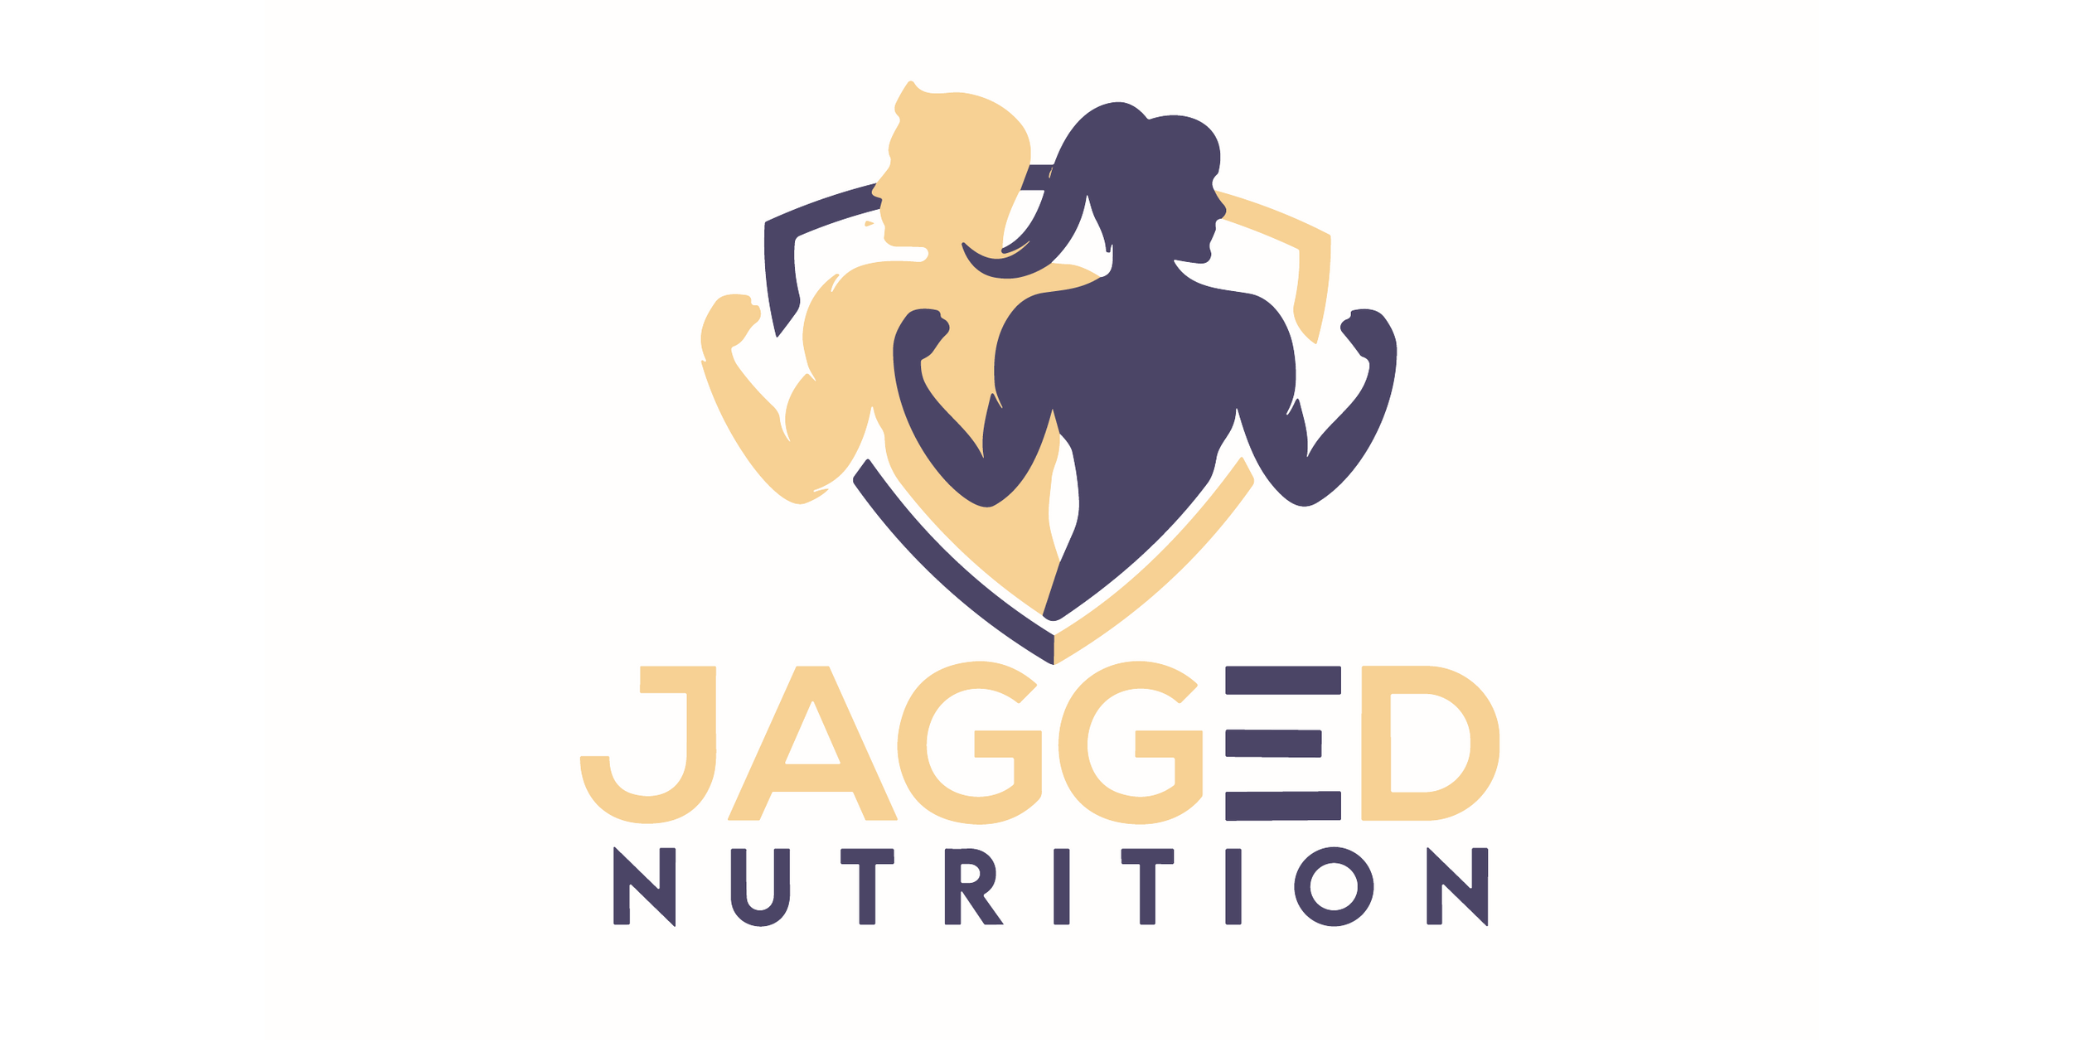 Jagged Nutrition